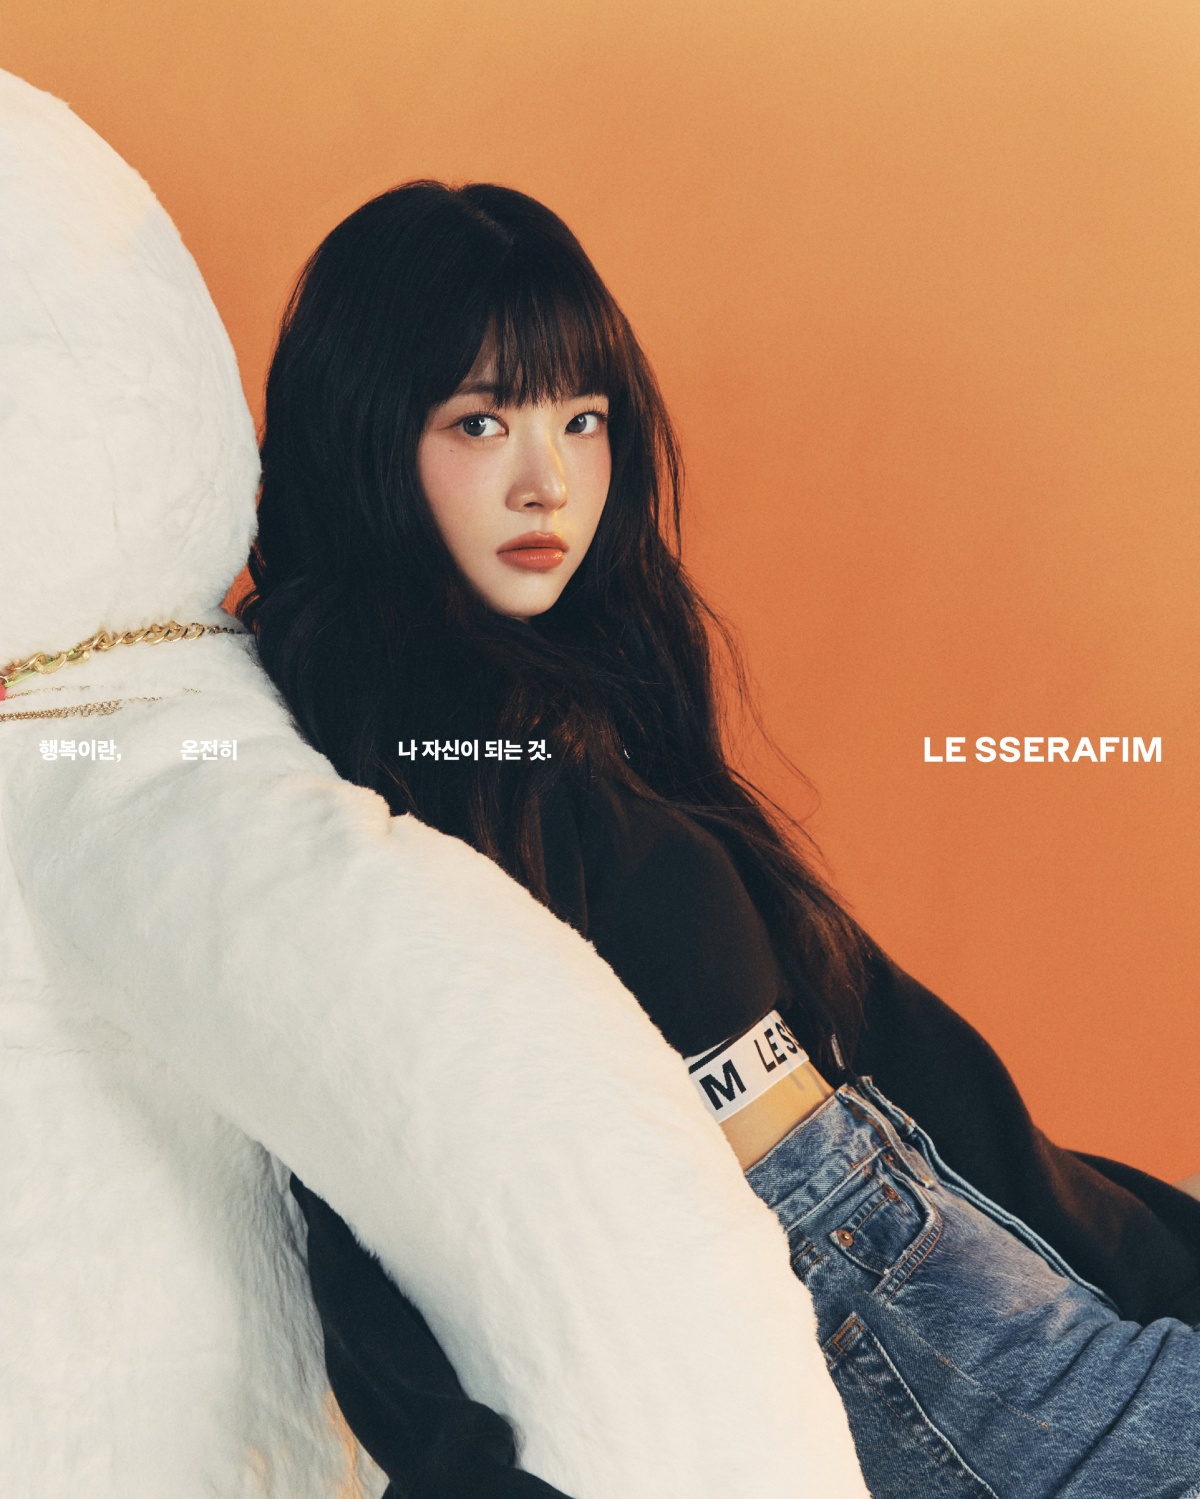 LE SSERAFIM, the first concept photo of the new album is released... 'Seol', an angel on the desk